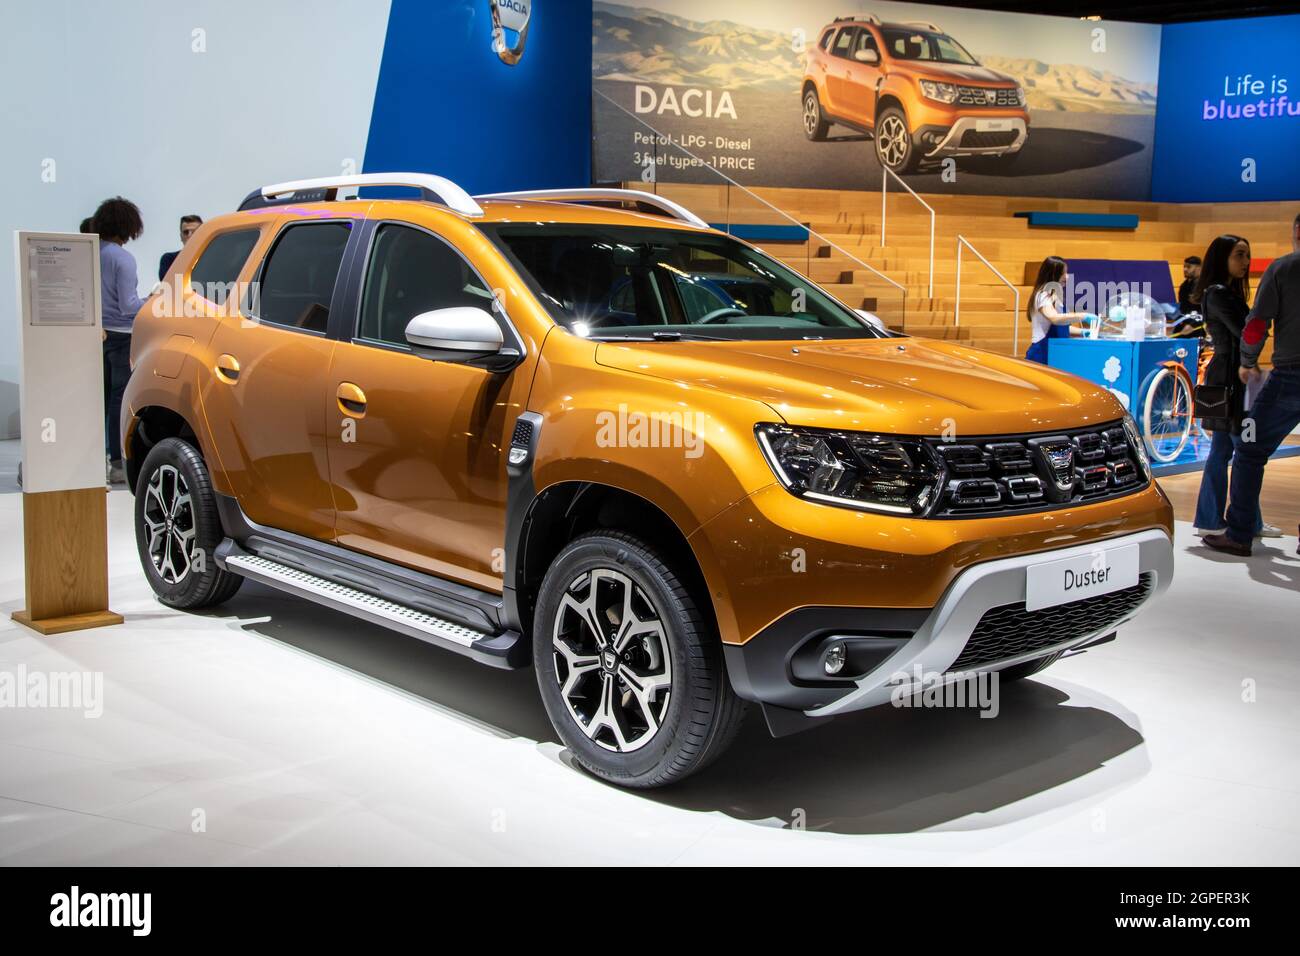 Dacia Duster car model shown at the Autosalon 2020 Motor Show. Brussels,  Belgium - January 9, 2020 Stock Photo - Alamy